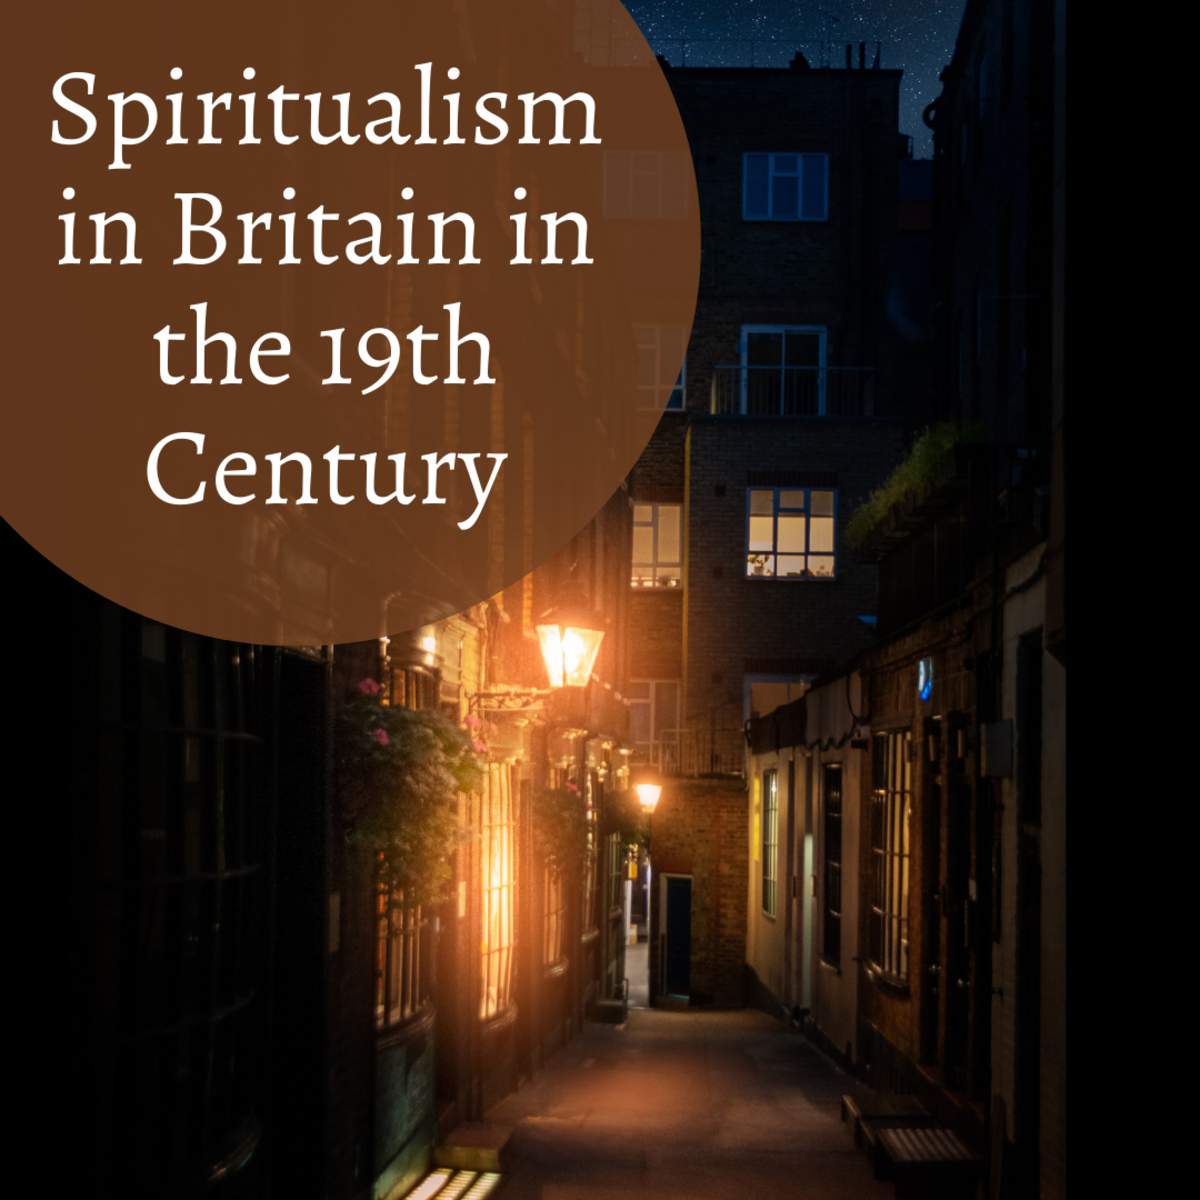 There is a long history of spiritualism in Britain.